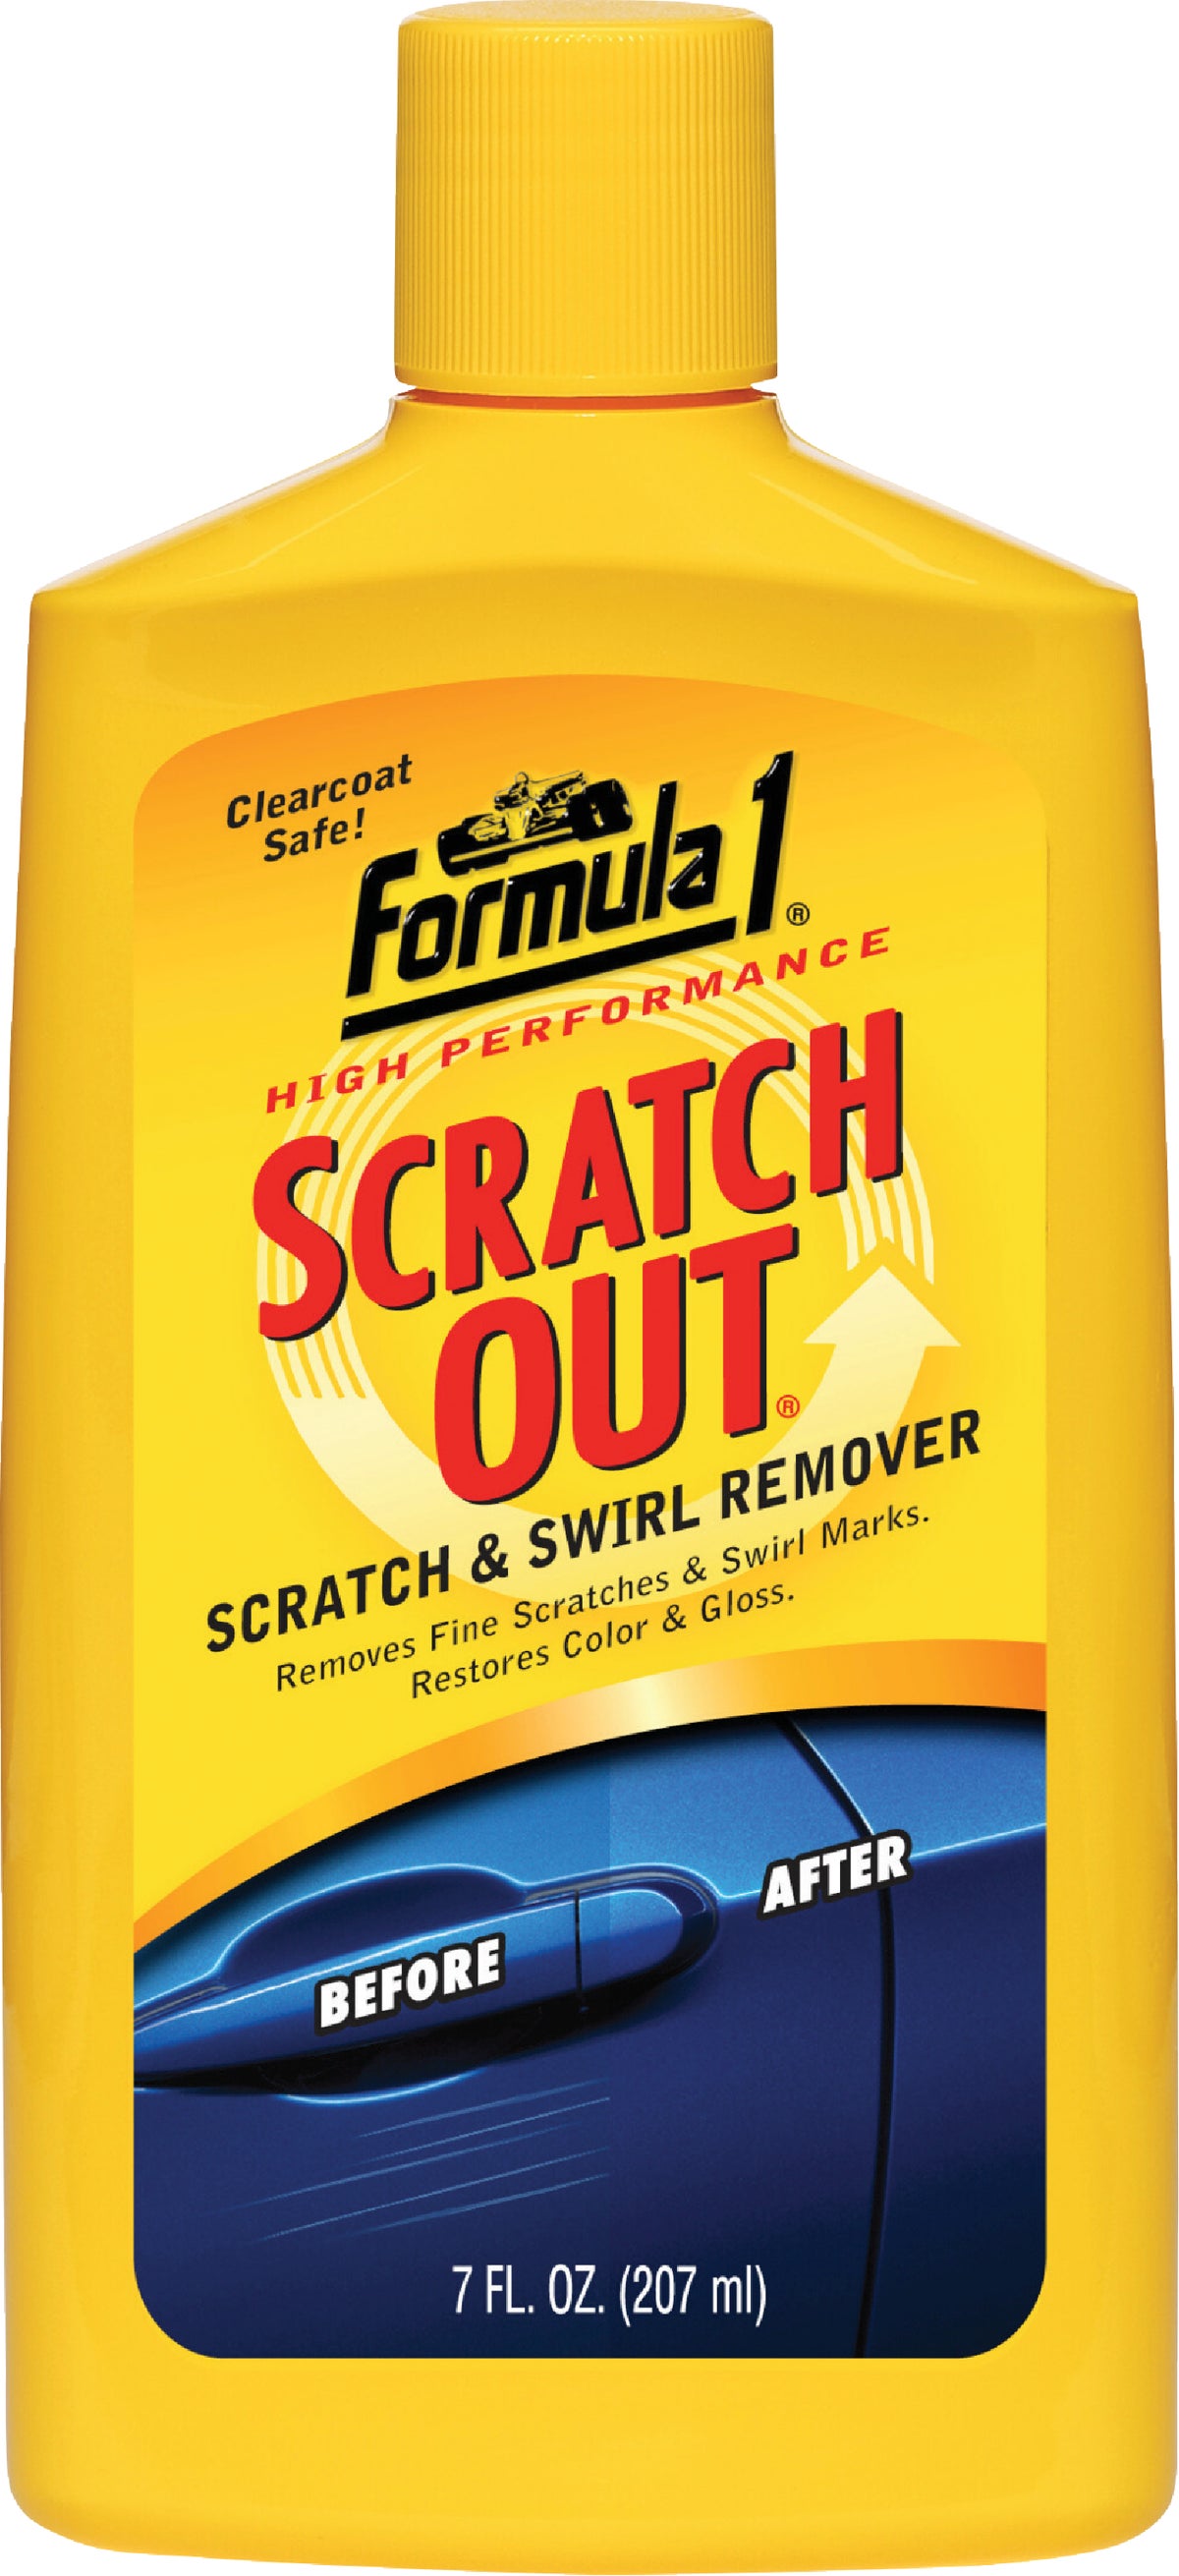 Nu Finish NFS-05 Scratch Doctor Rubbing Compound - 1 Each